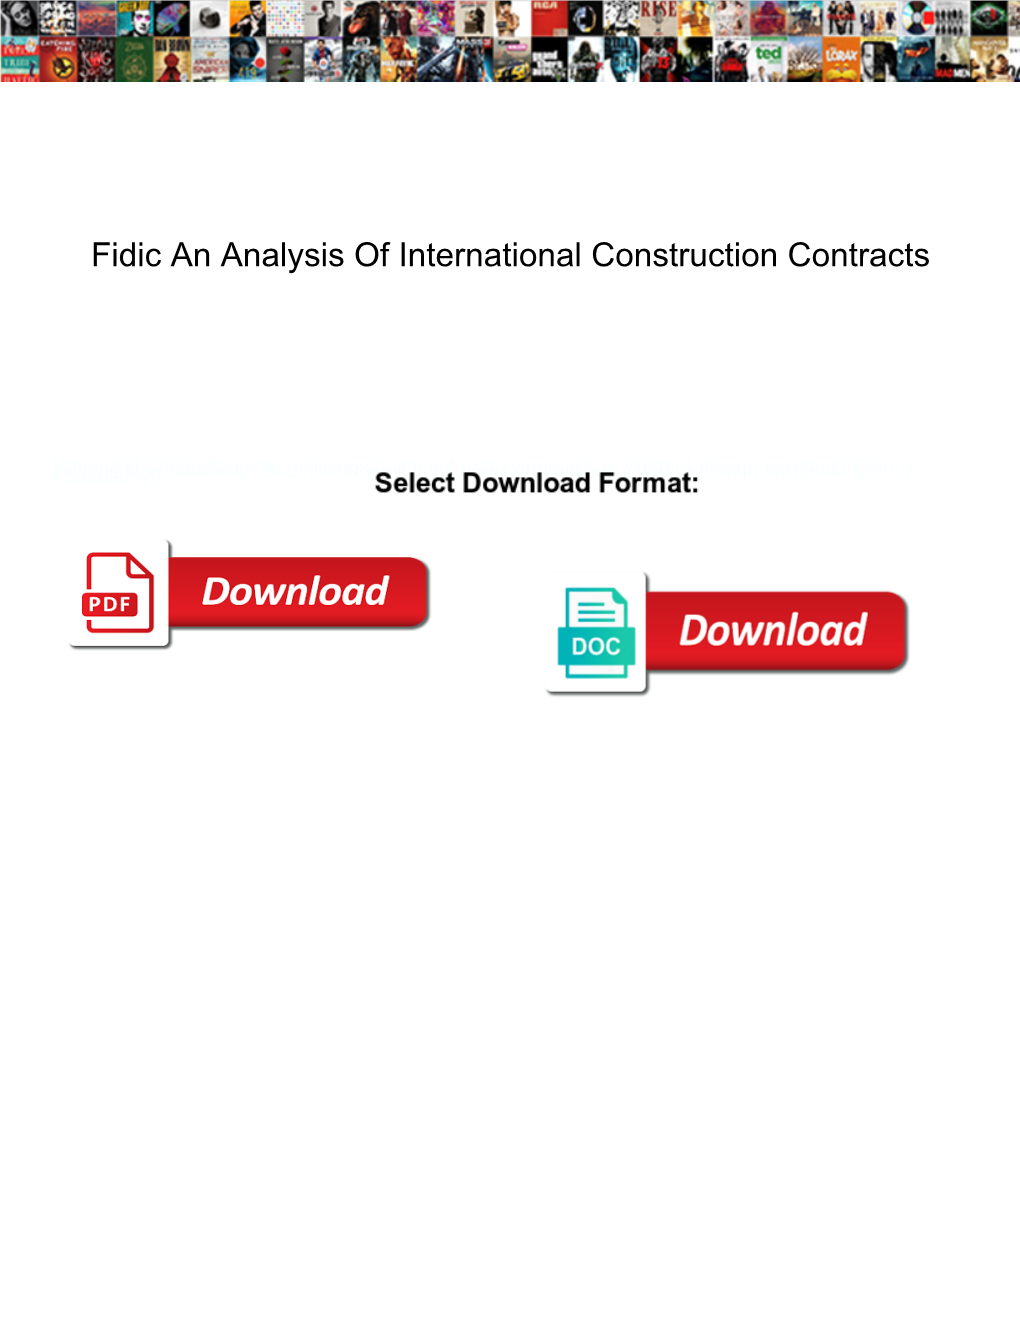 Fidic an Analysis of International Construction Contracts